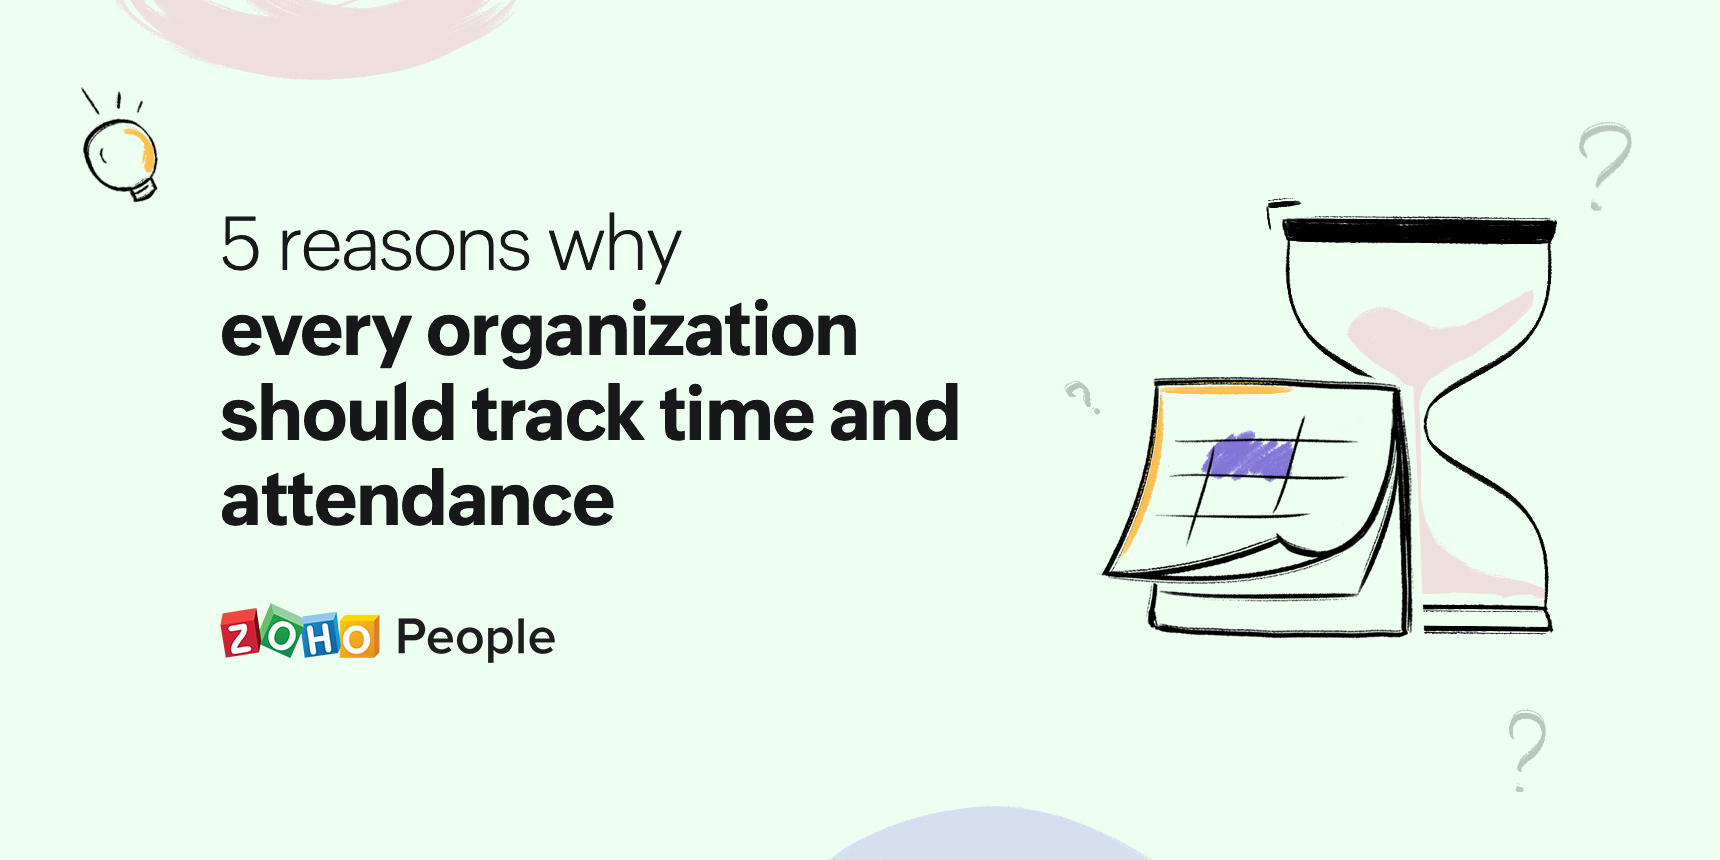 5 benefits of tracking employee time and attendance